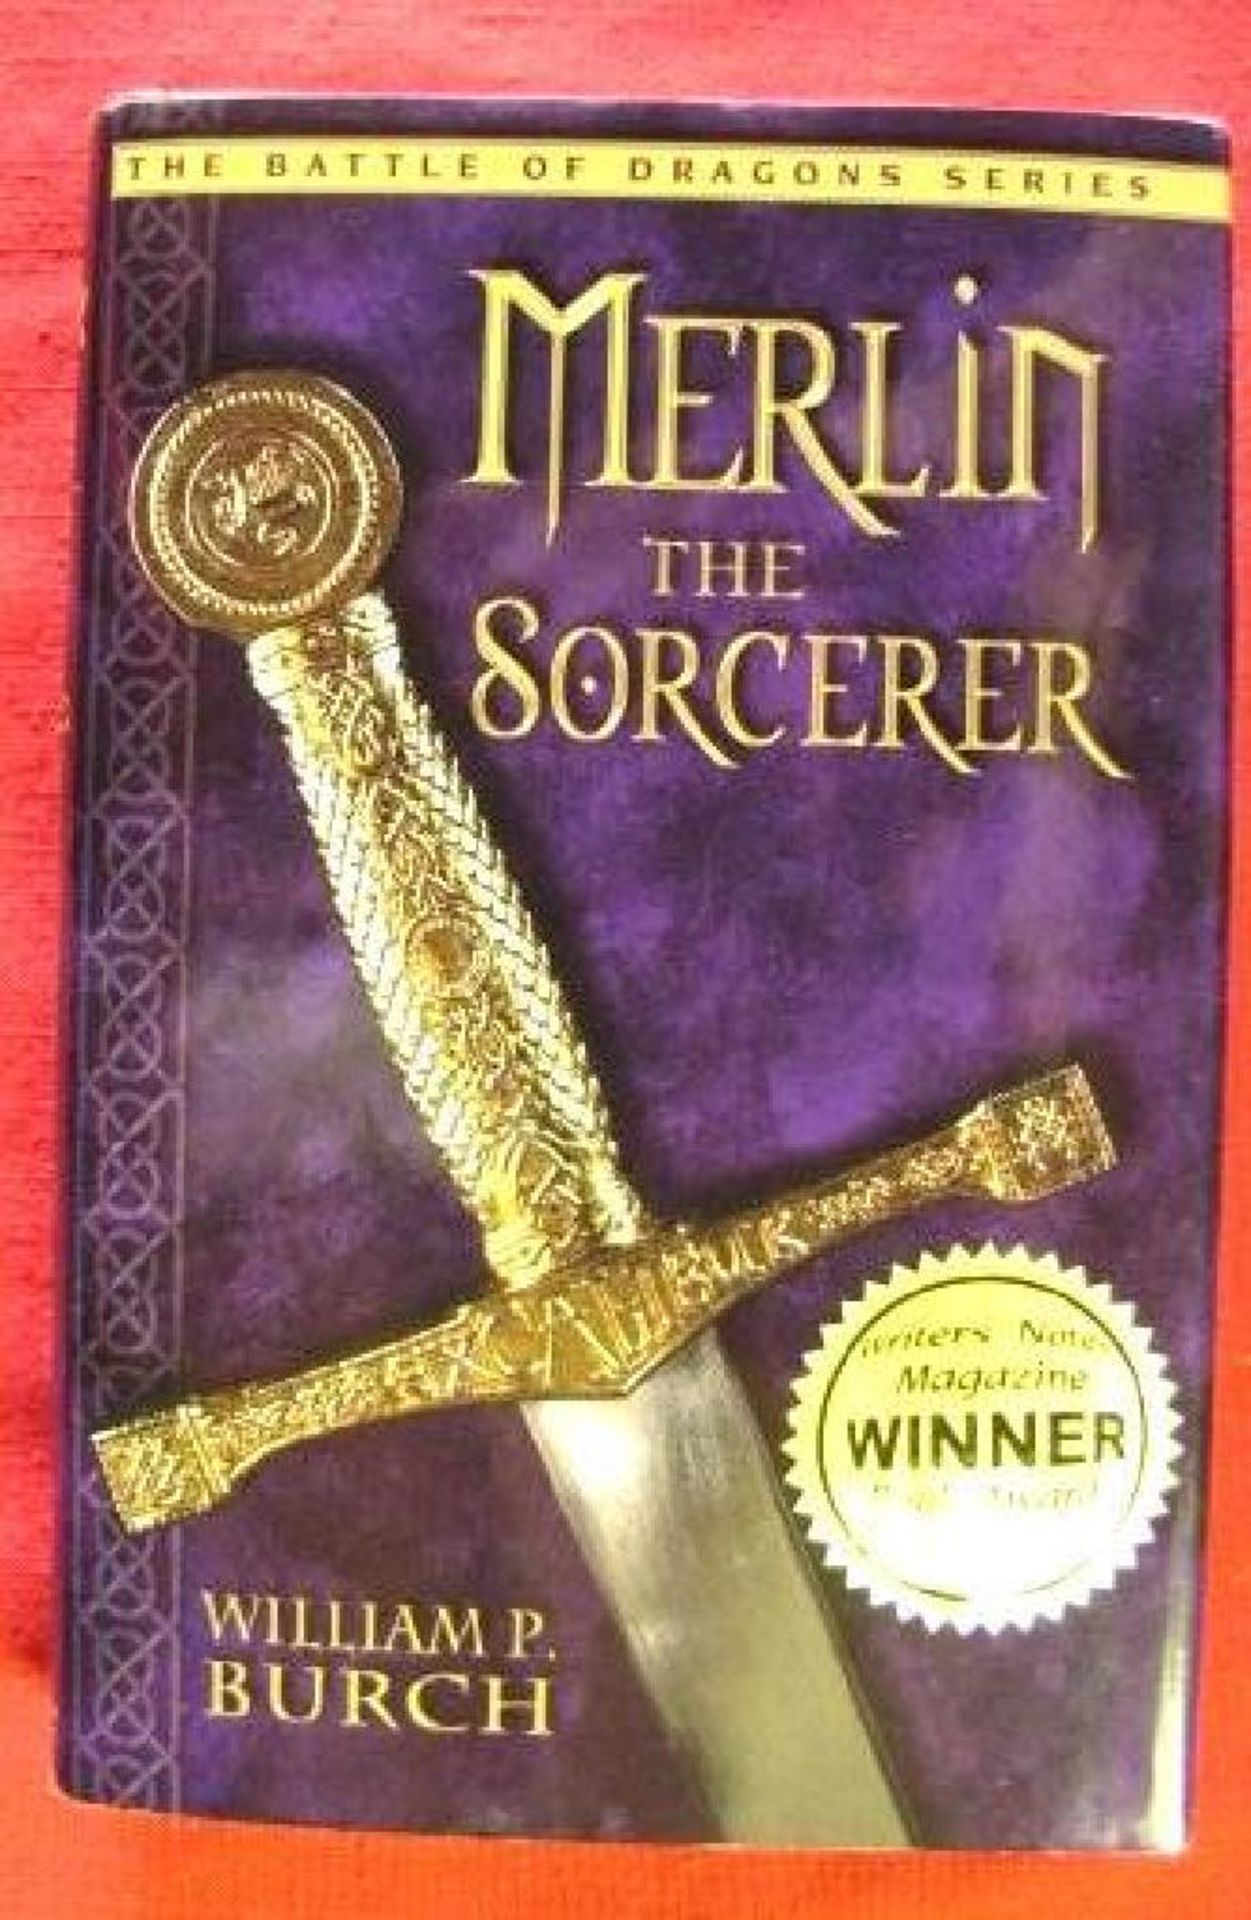 Book: "Merlin the Sorcerer" by William P Burch     First Edition  Award winning book  Signed by